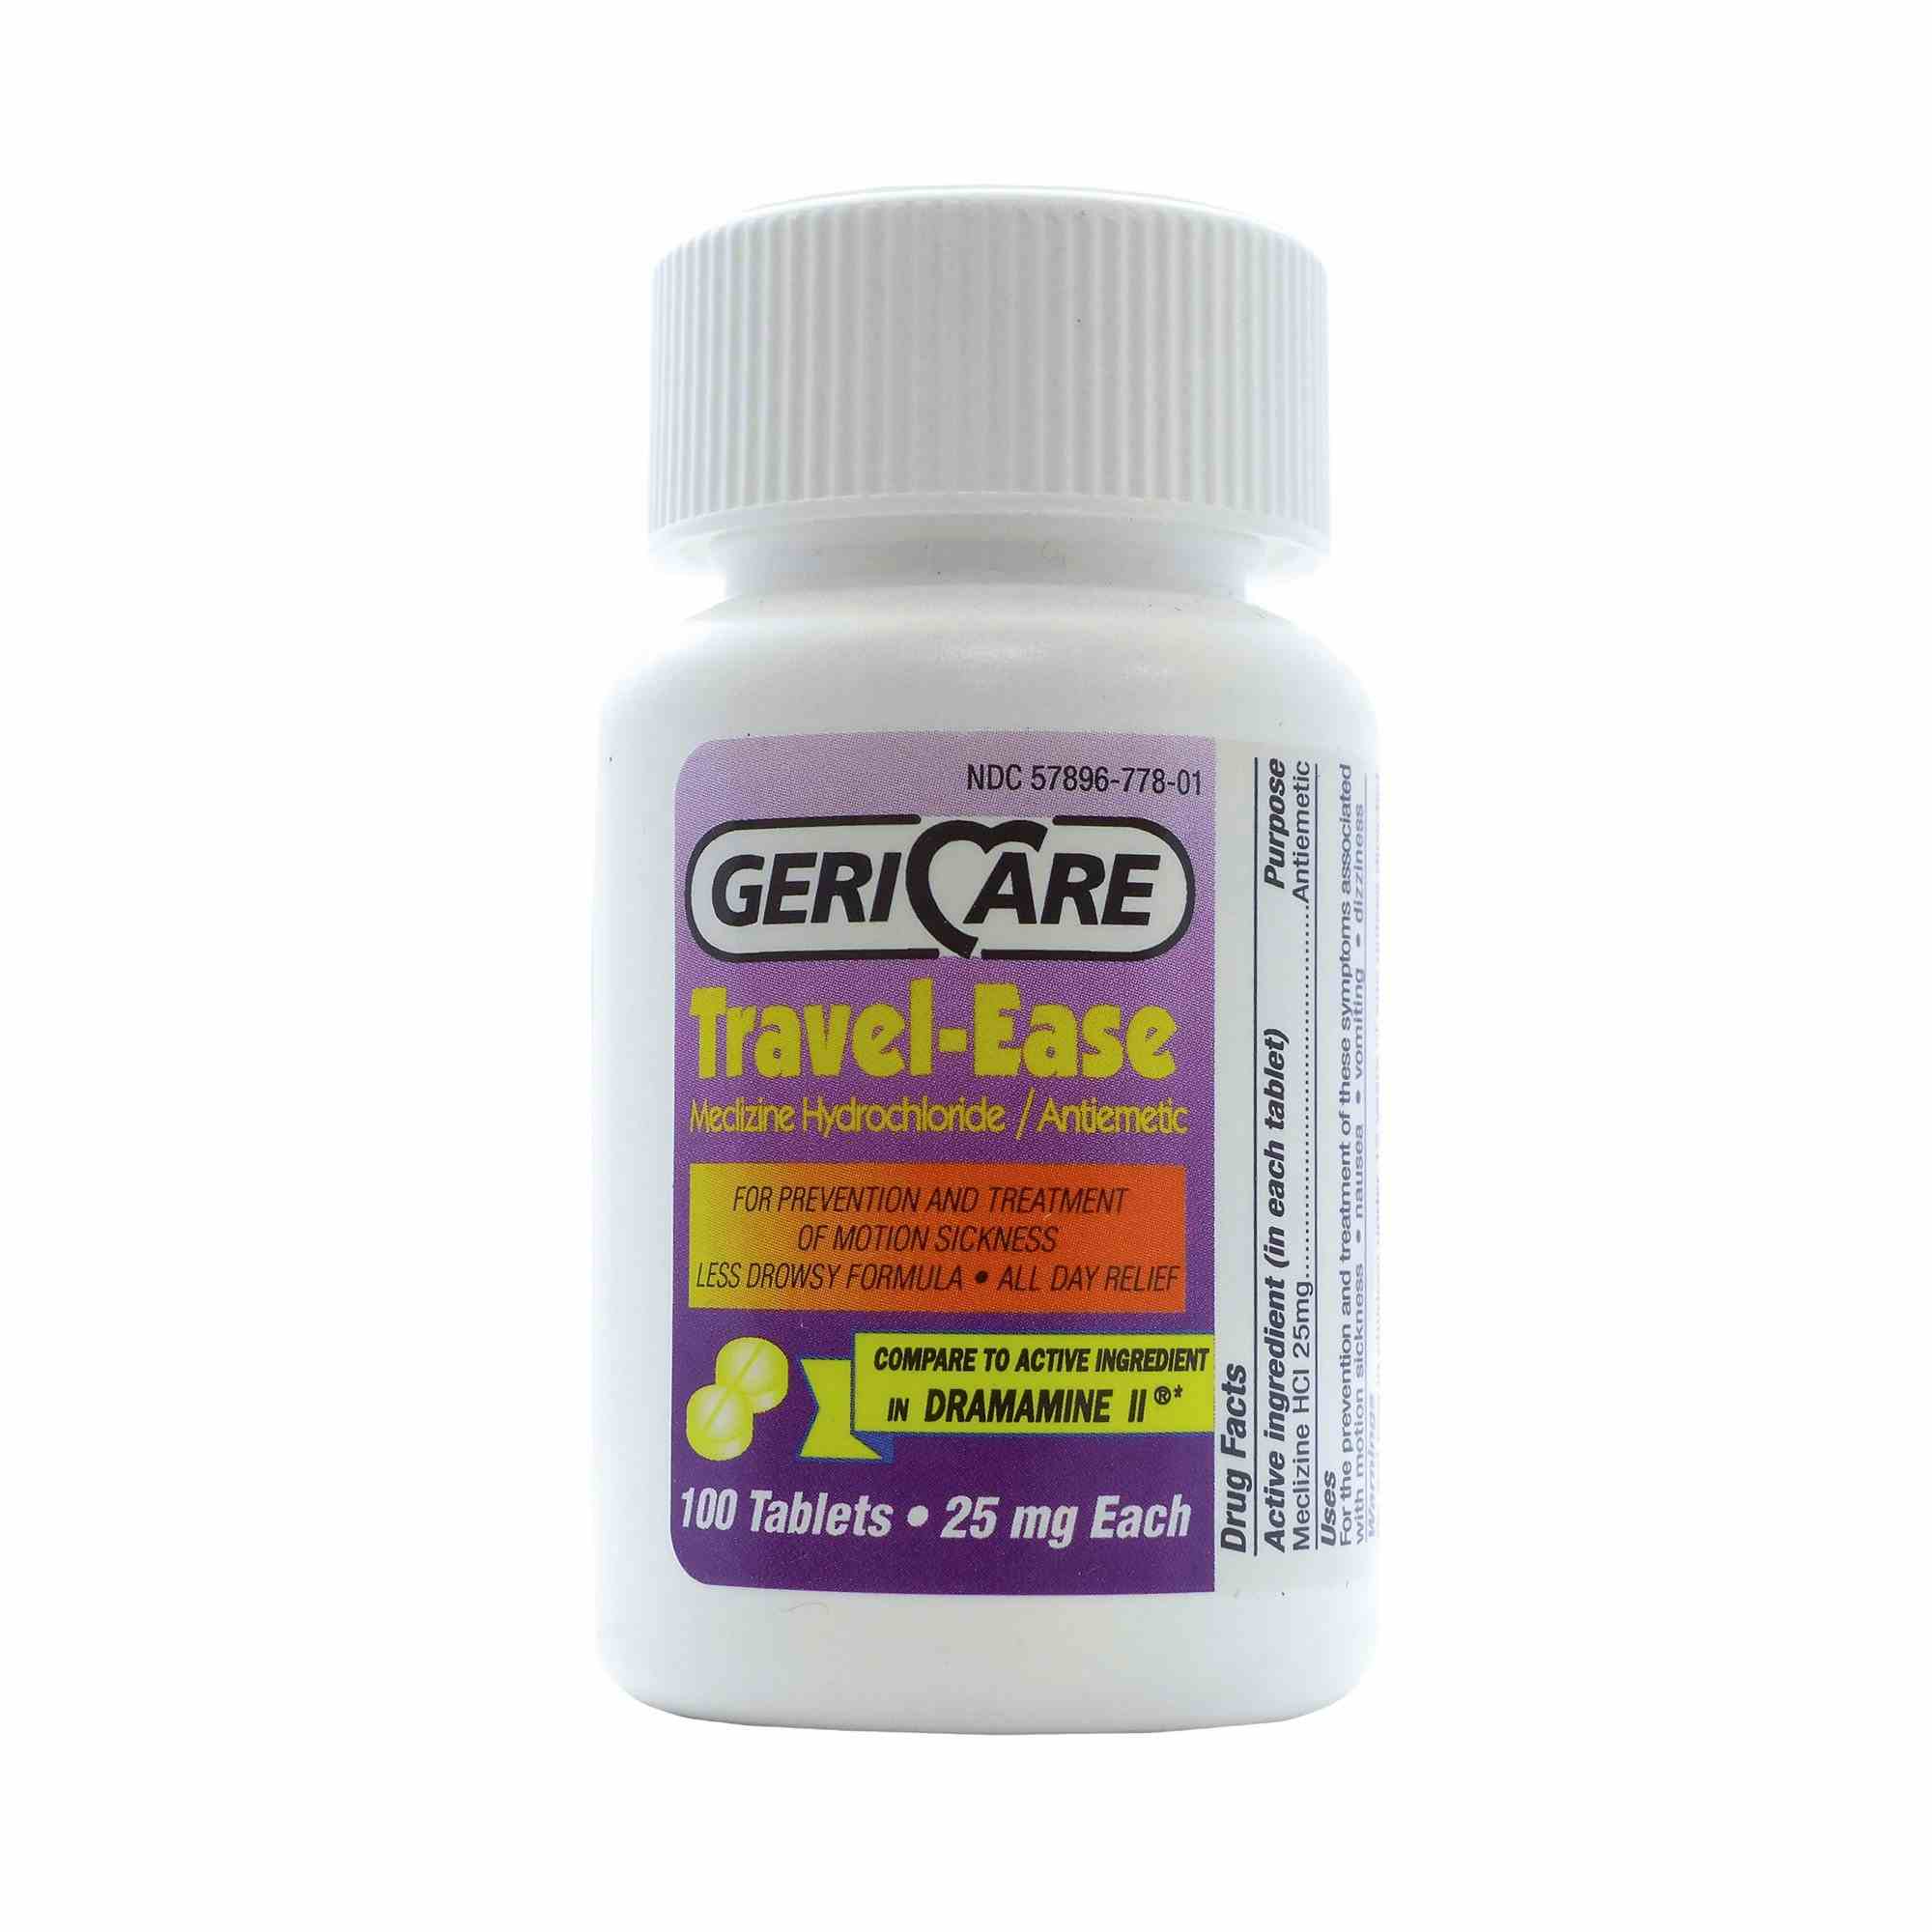 Geri-Care Travel Ease Nausea Relief, 25 mg, 100 Tablets, 778-01, 1 Bottle